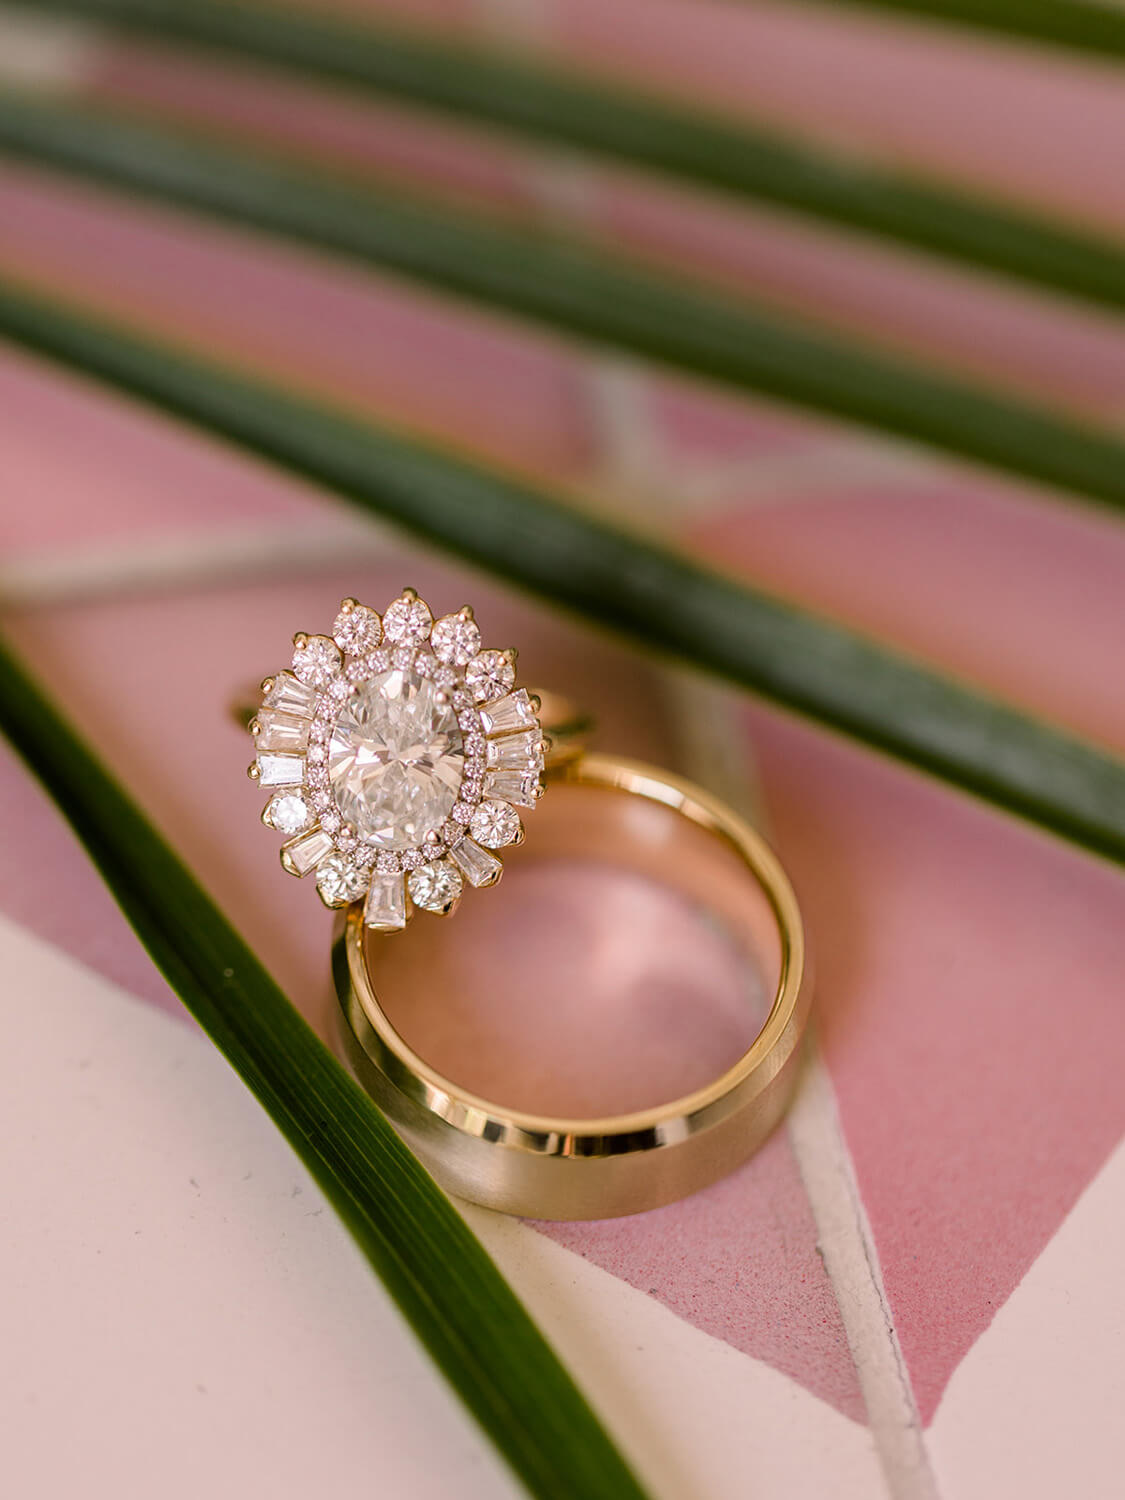 Engagement ring and gold wedding band